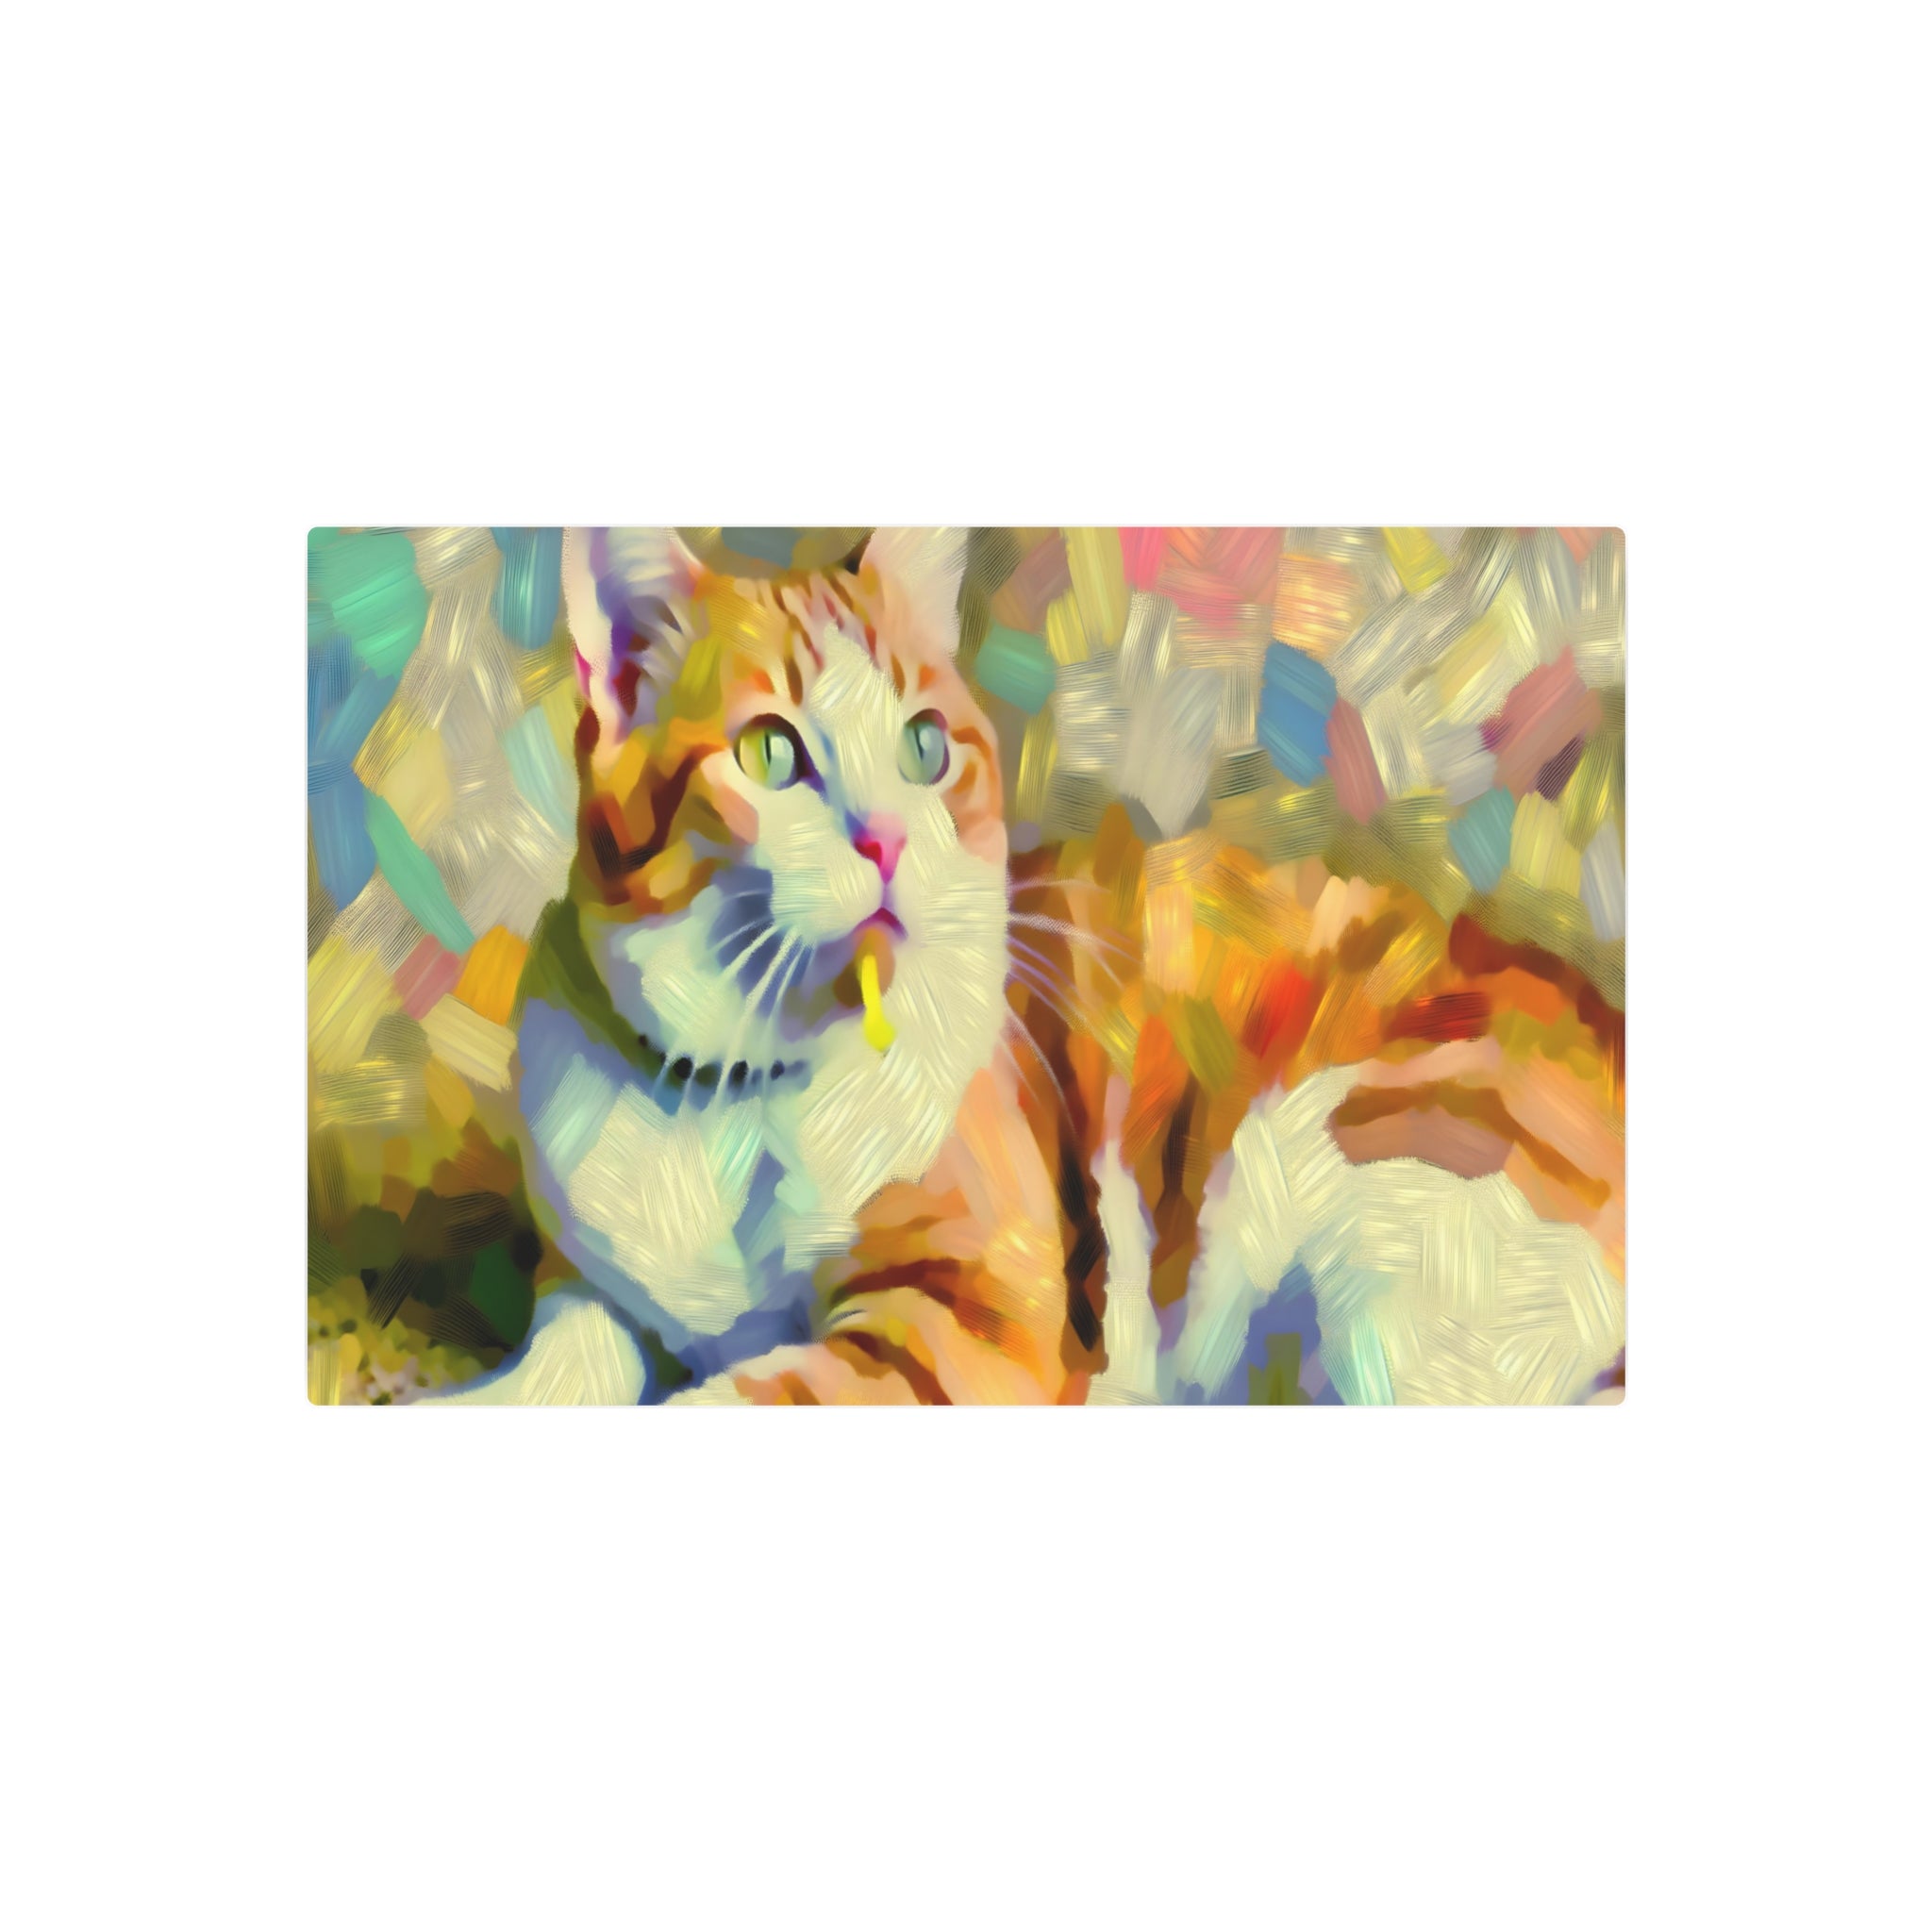 Metal Poster Art | "Impressionist Style Cat Artwork - Western Art Styles, Impressionism Collection" - Metal Poster Art 30″ x 20″ (Horizontal) 0.12''